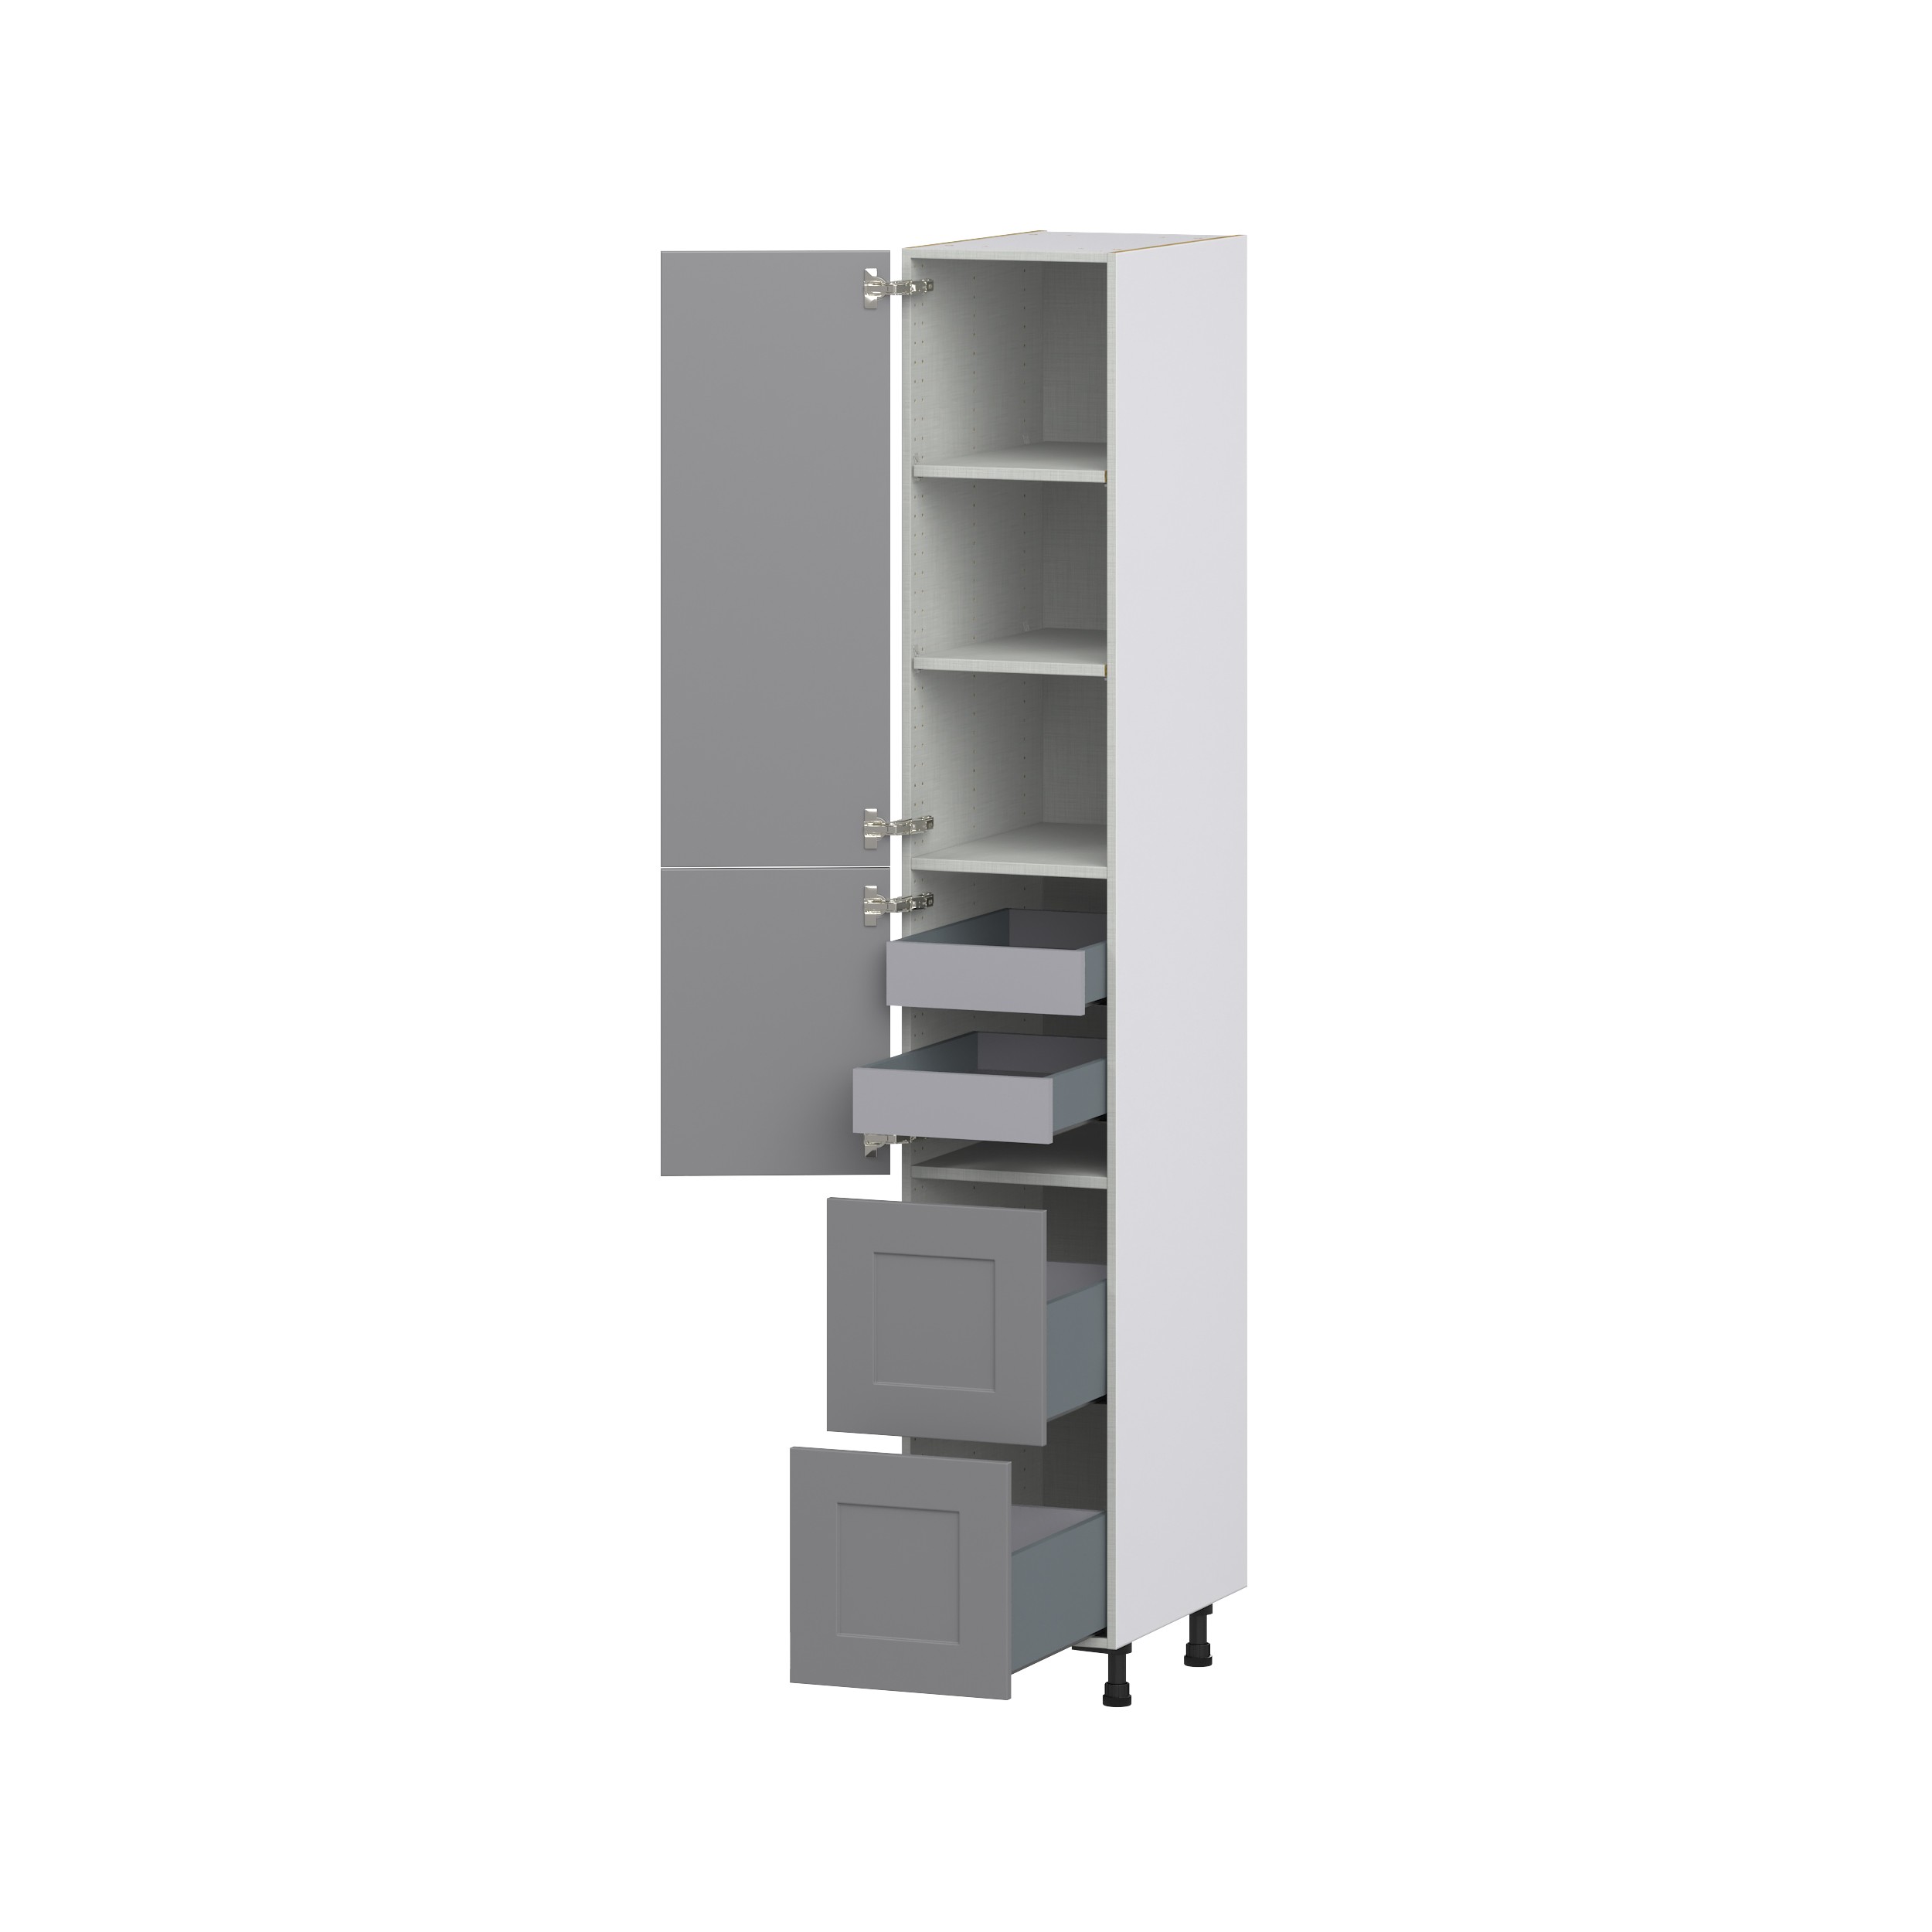 Willow Painted Slate Gray Shaker Assembled Pantry Cabinet 2 Doors with 2 Drawers and 2 Inner Drawers (15 in. W X 94.5 in. H X 24 in. D)